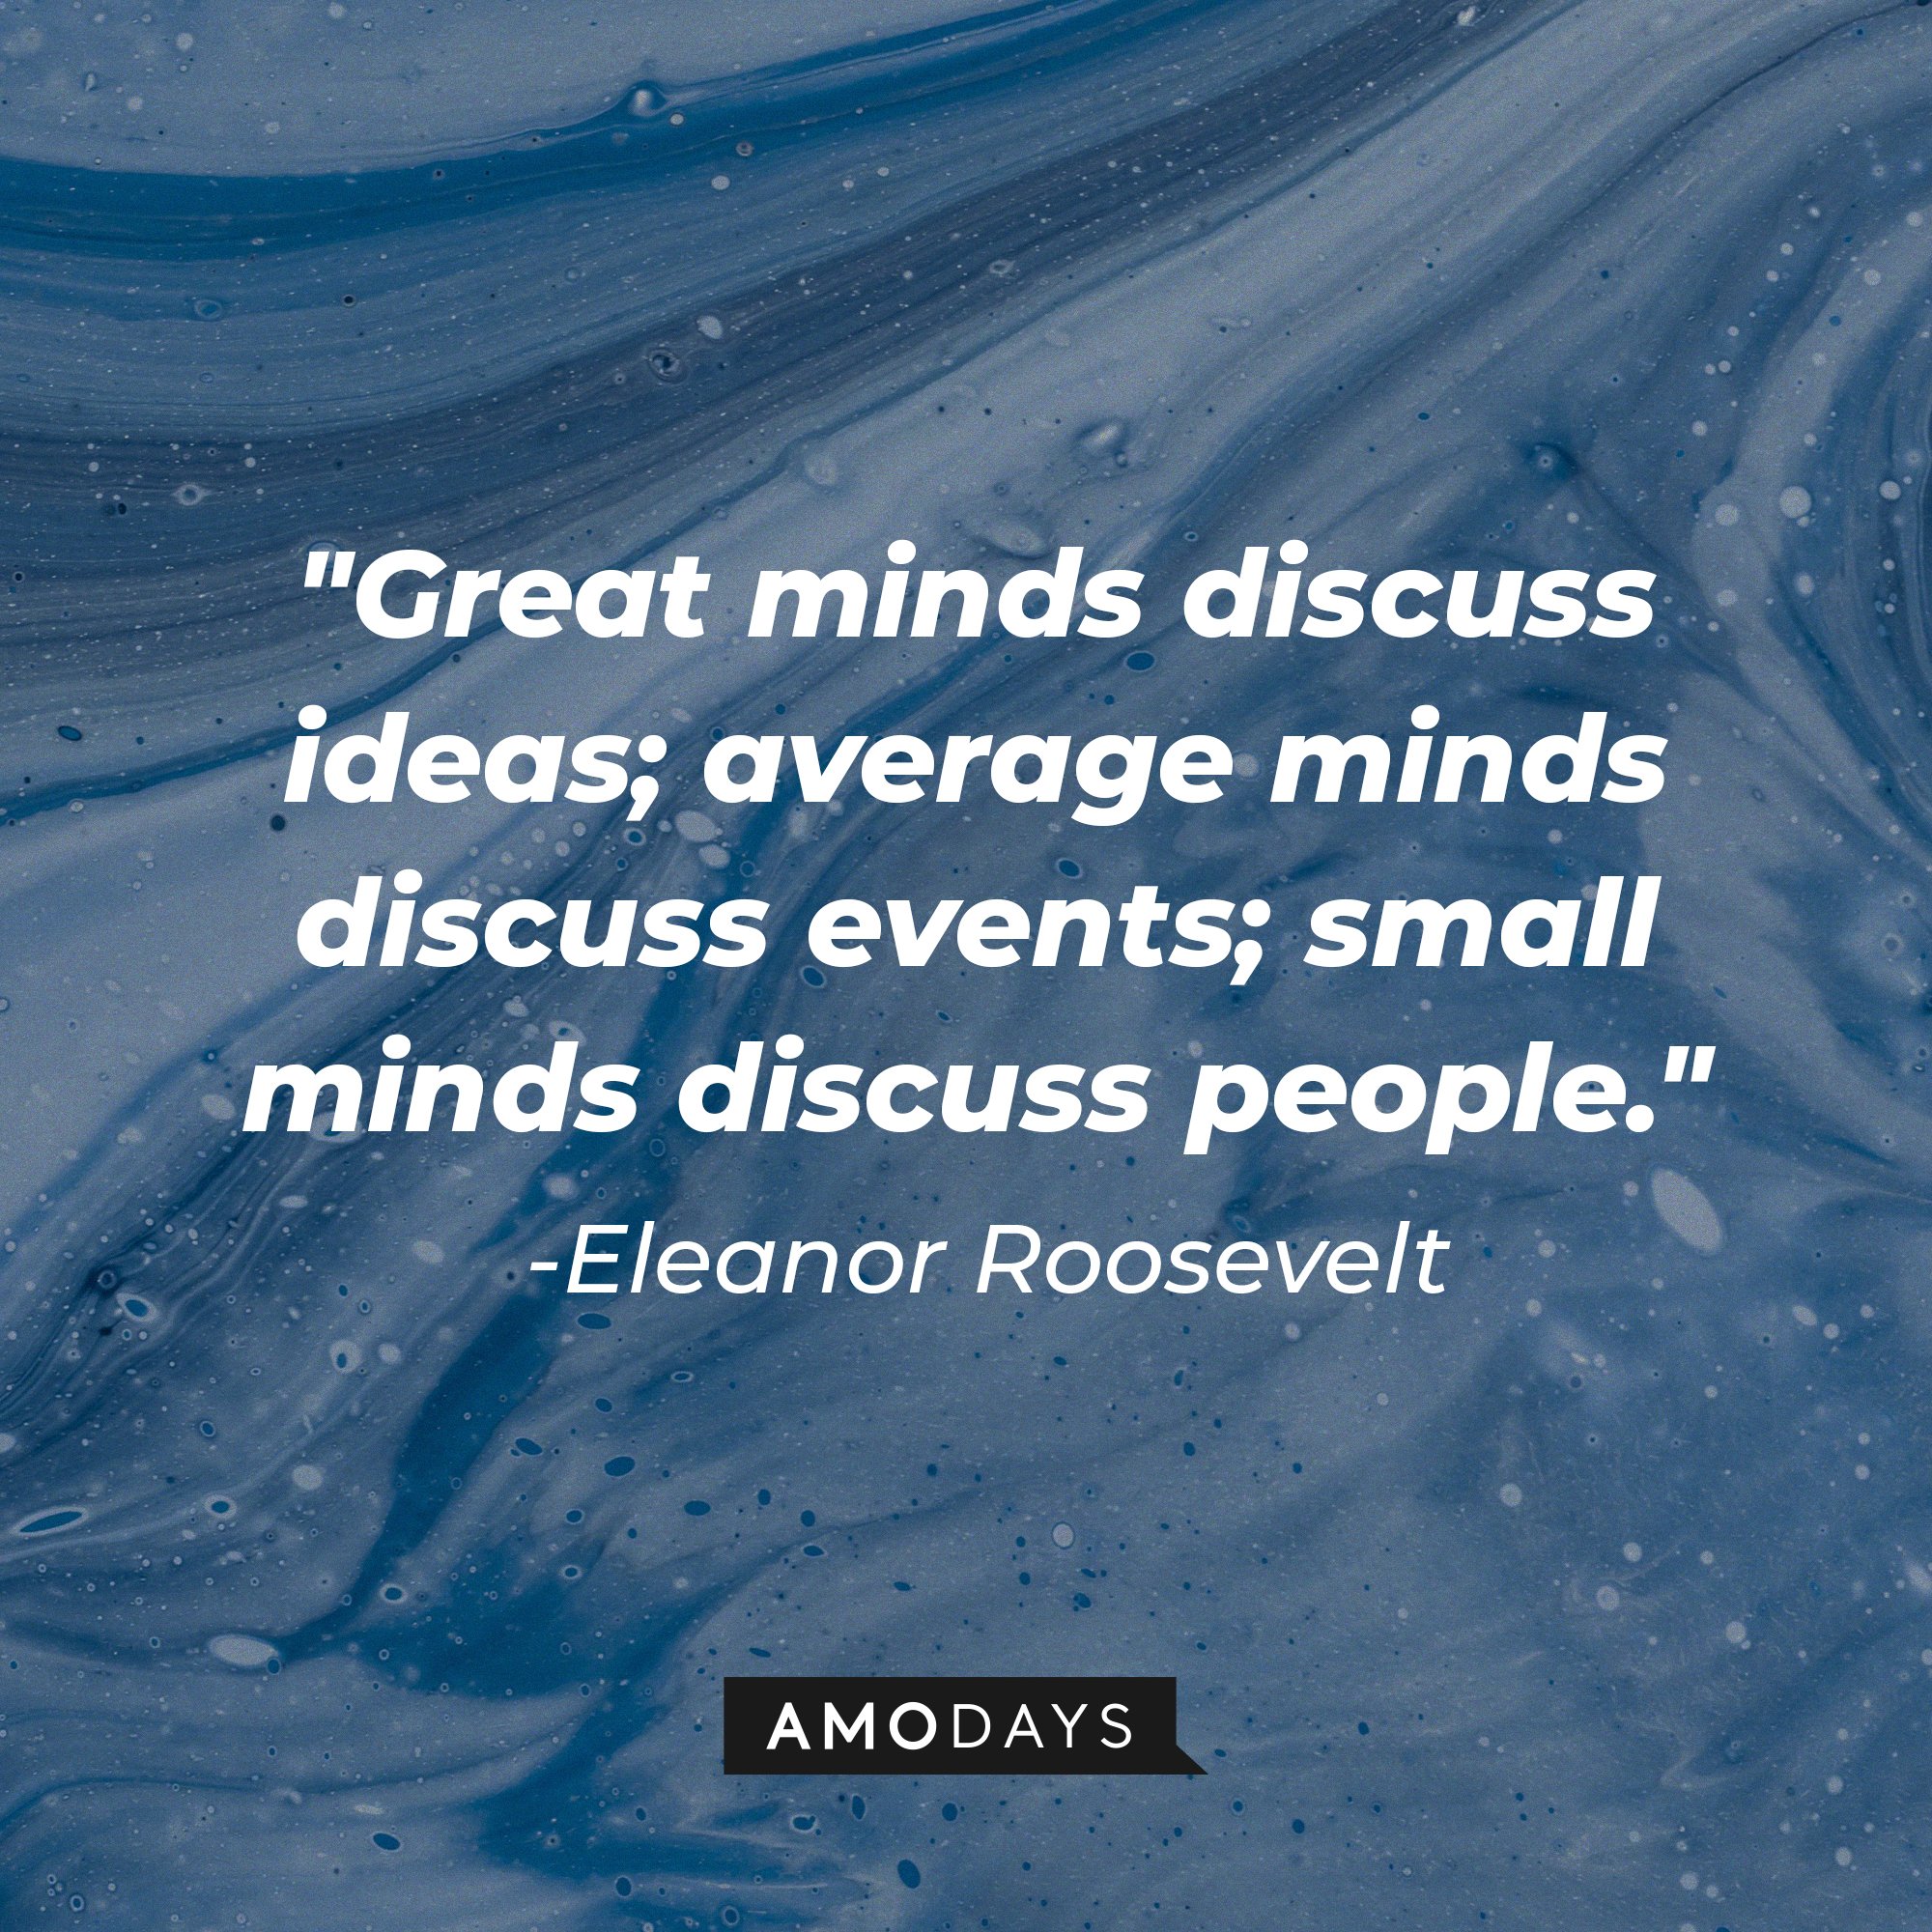 Eleanor Roosevelt's quote: "Great minds discuss ideas; average minds discuss events; small minds discuss people." | Image: AmoDays